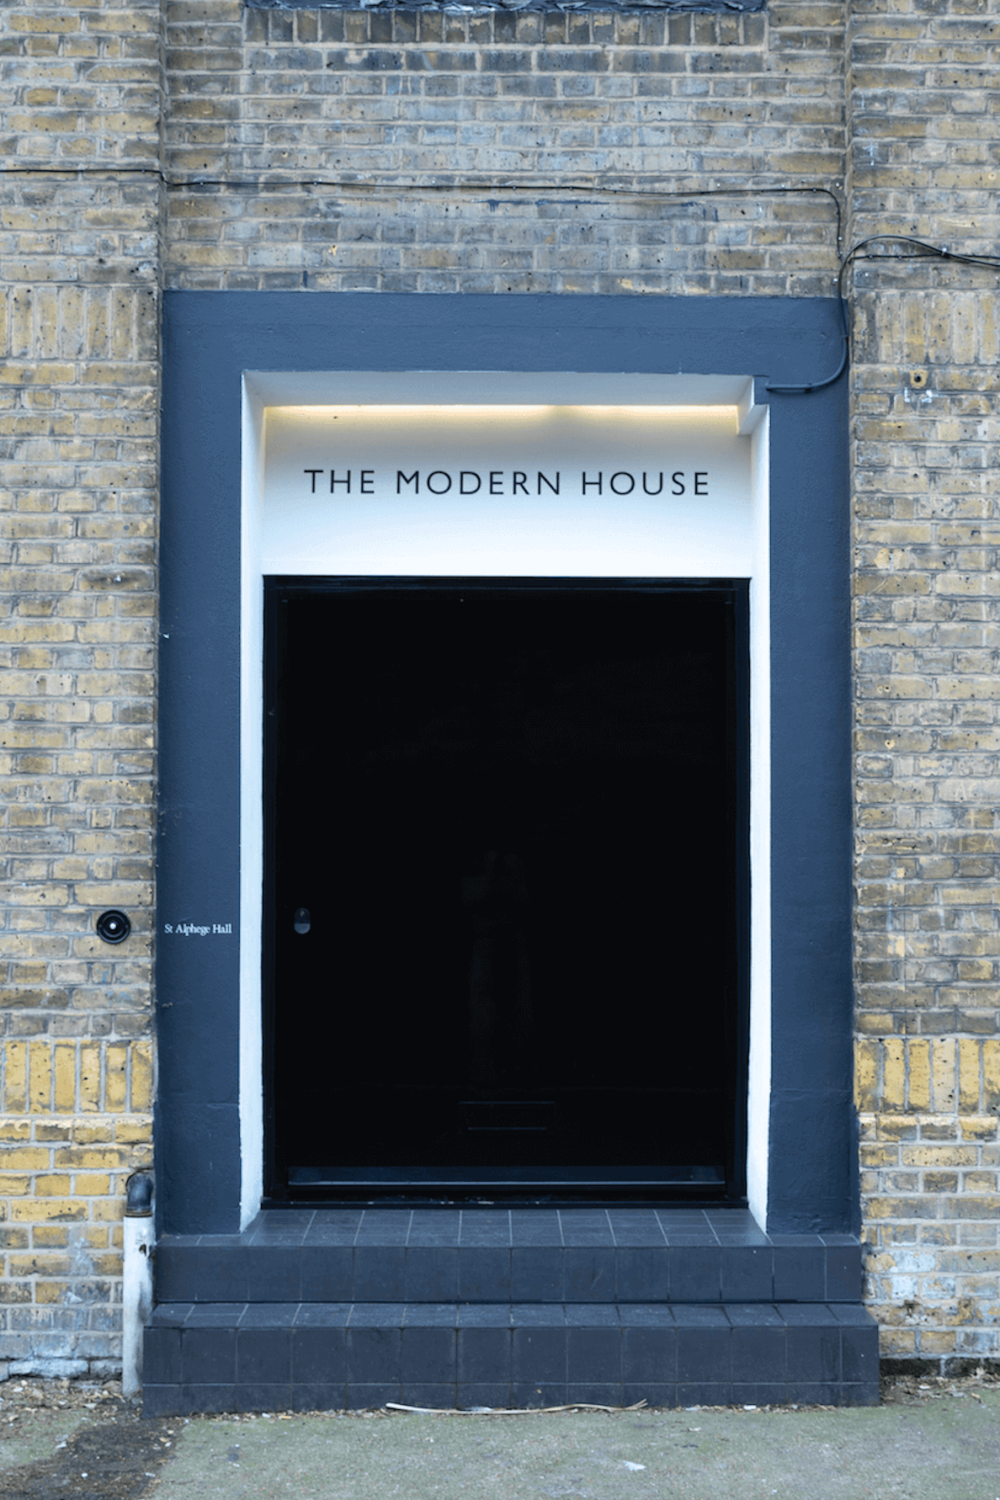 The entrance of The Modern House in London